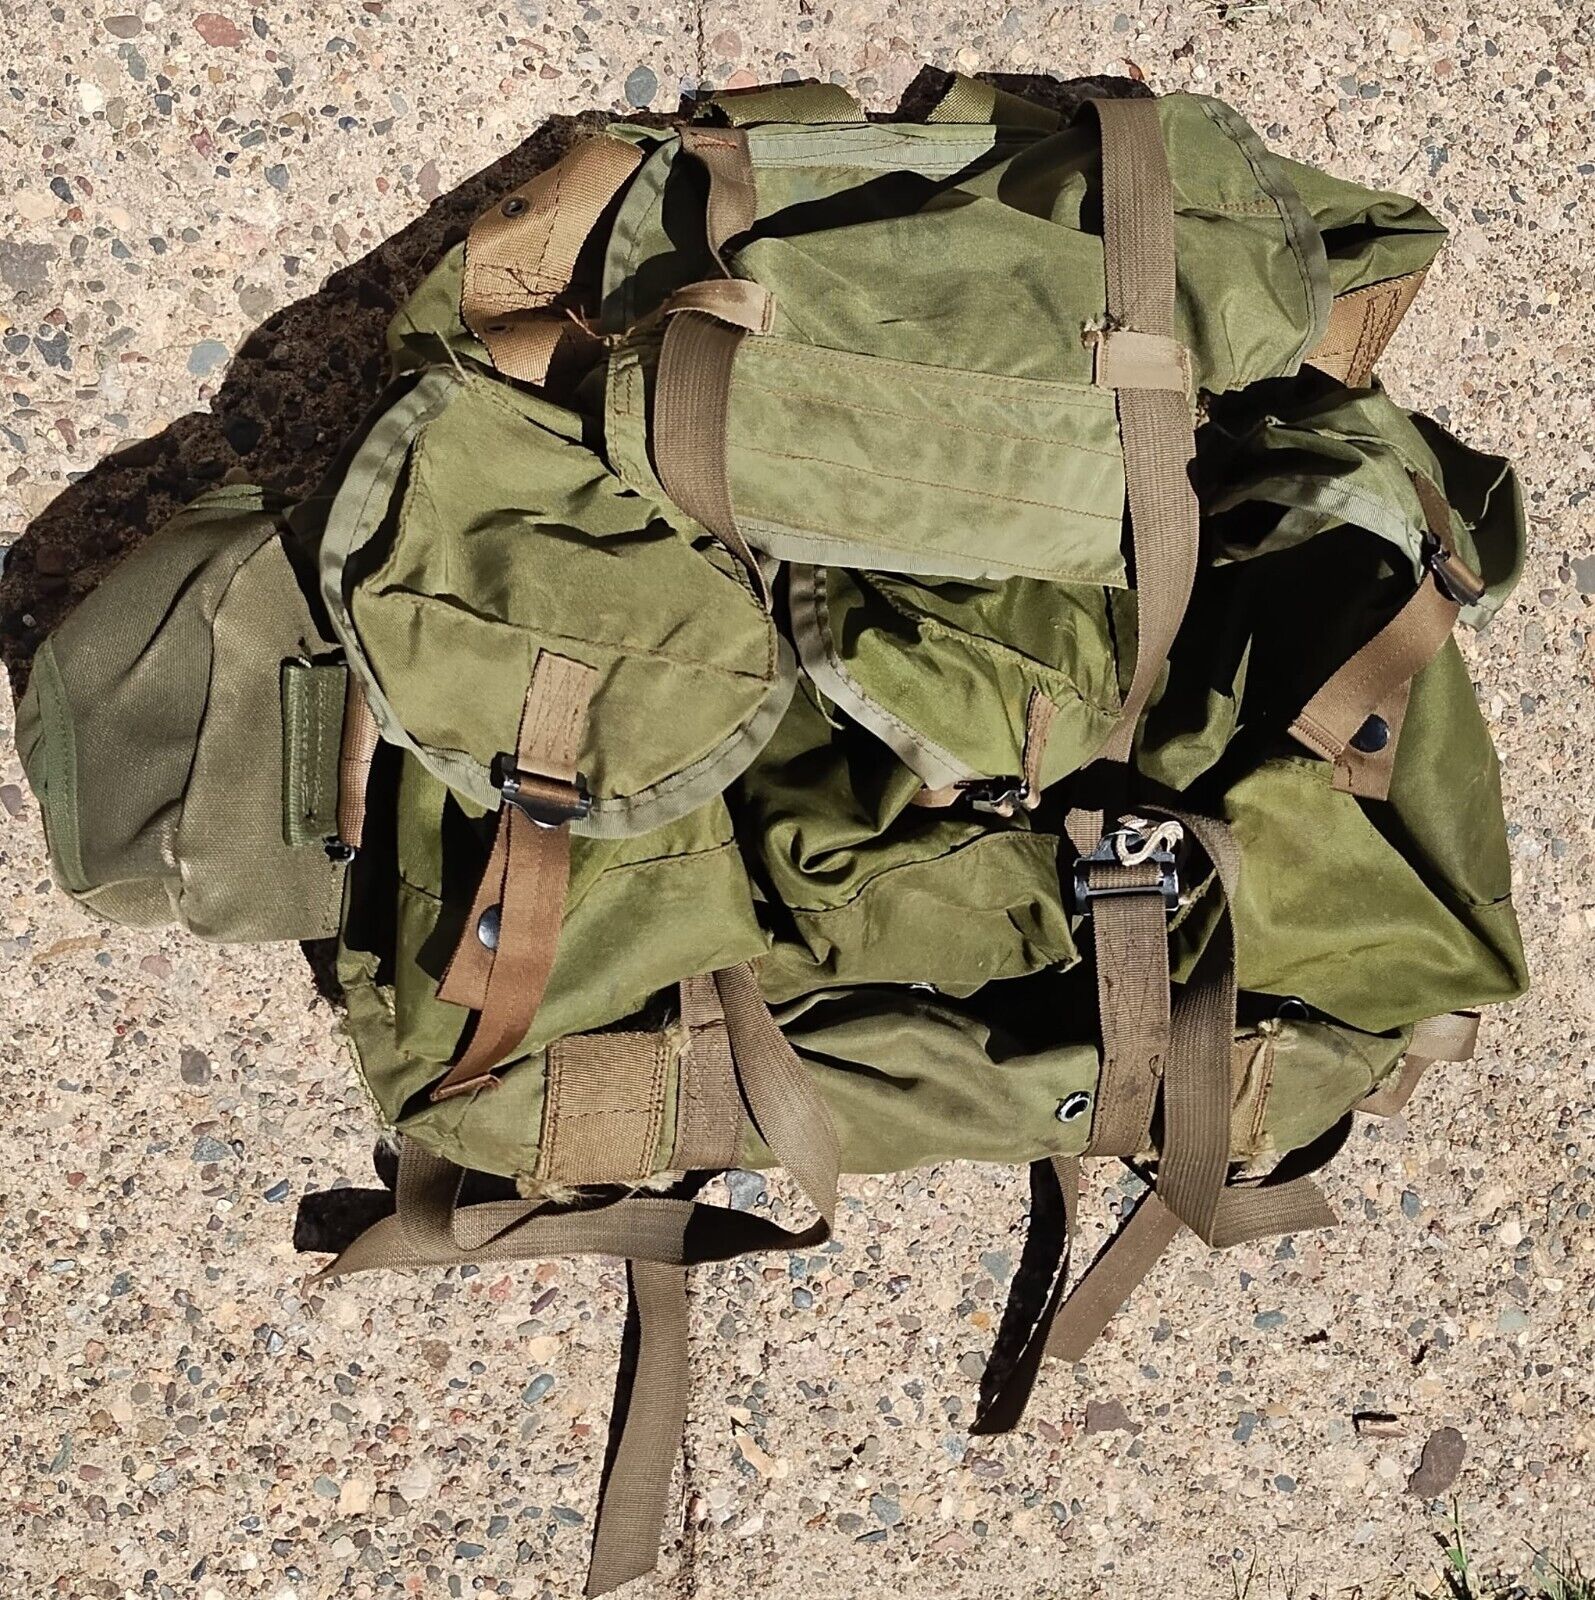 Vietnam War Army Tropical Jungle Rucksack, From 199th Inf Bde Company Commander